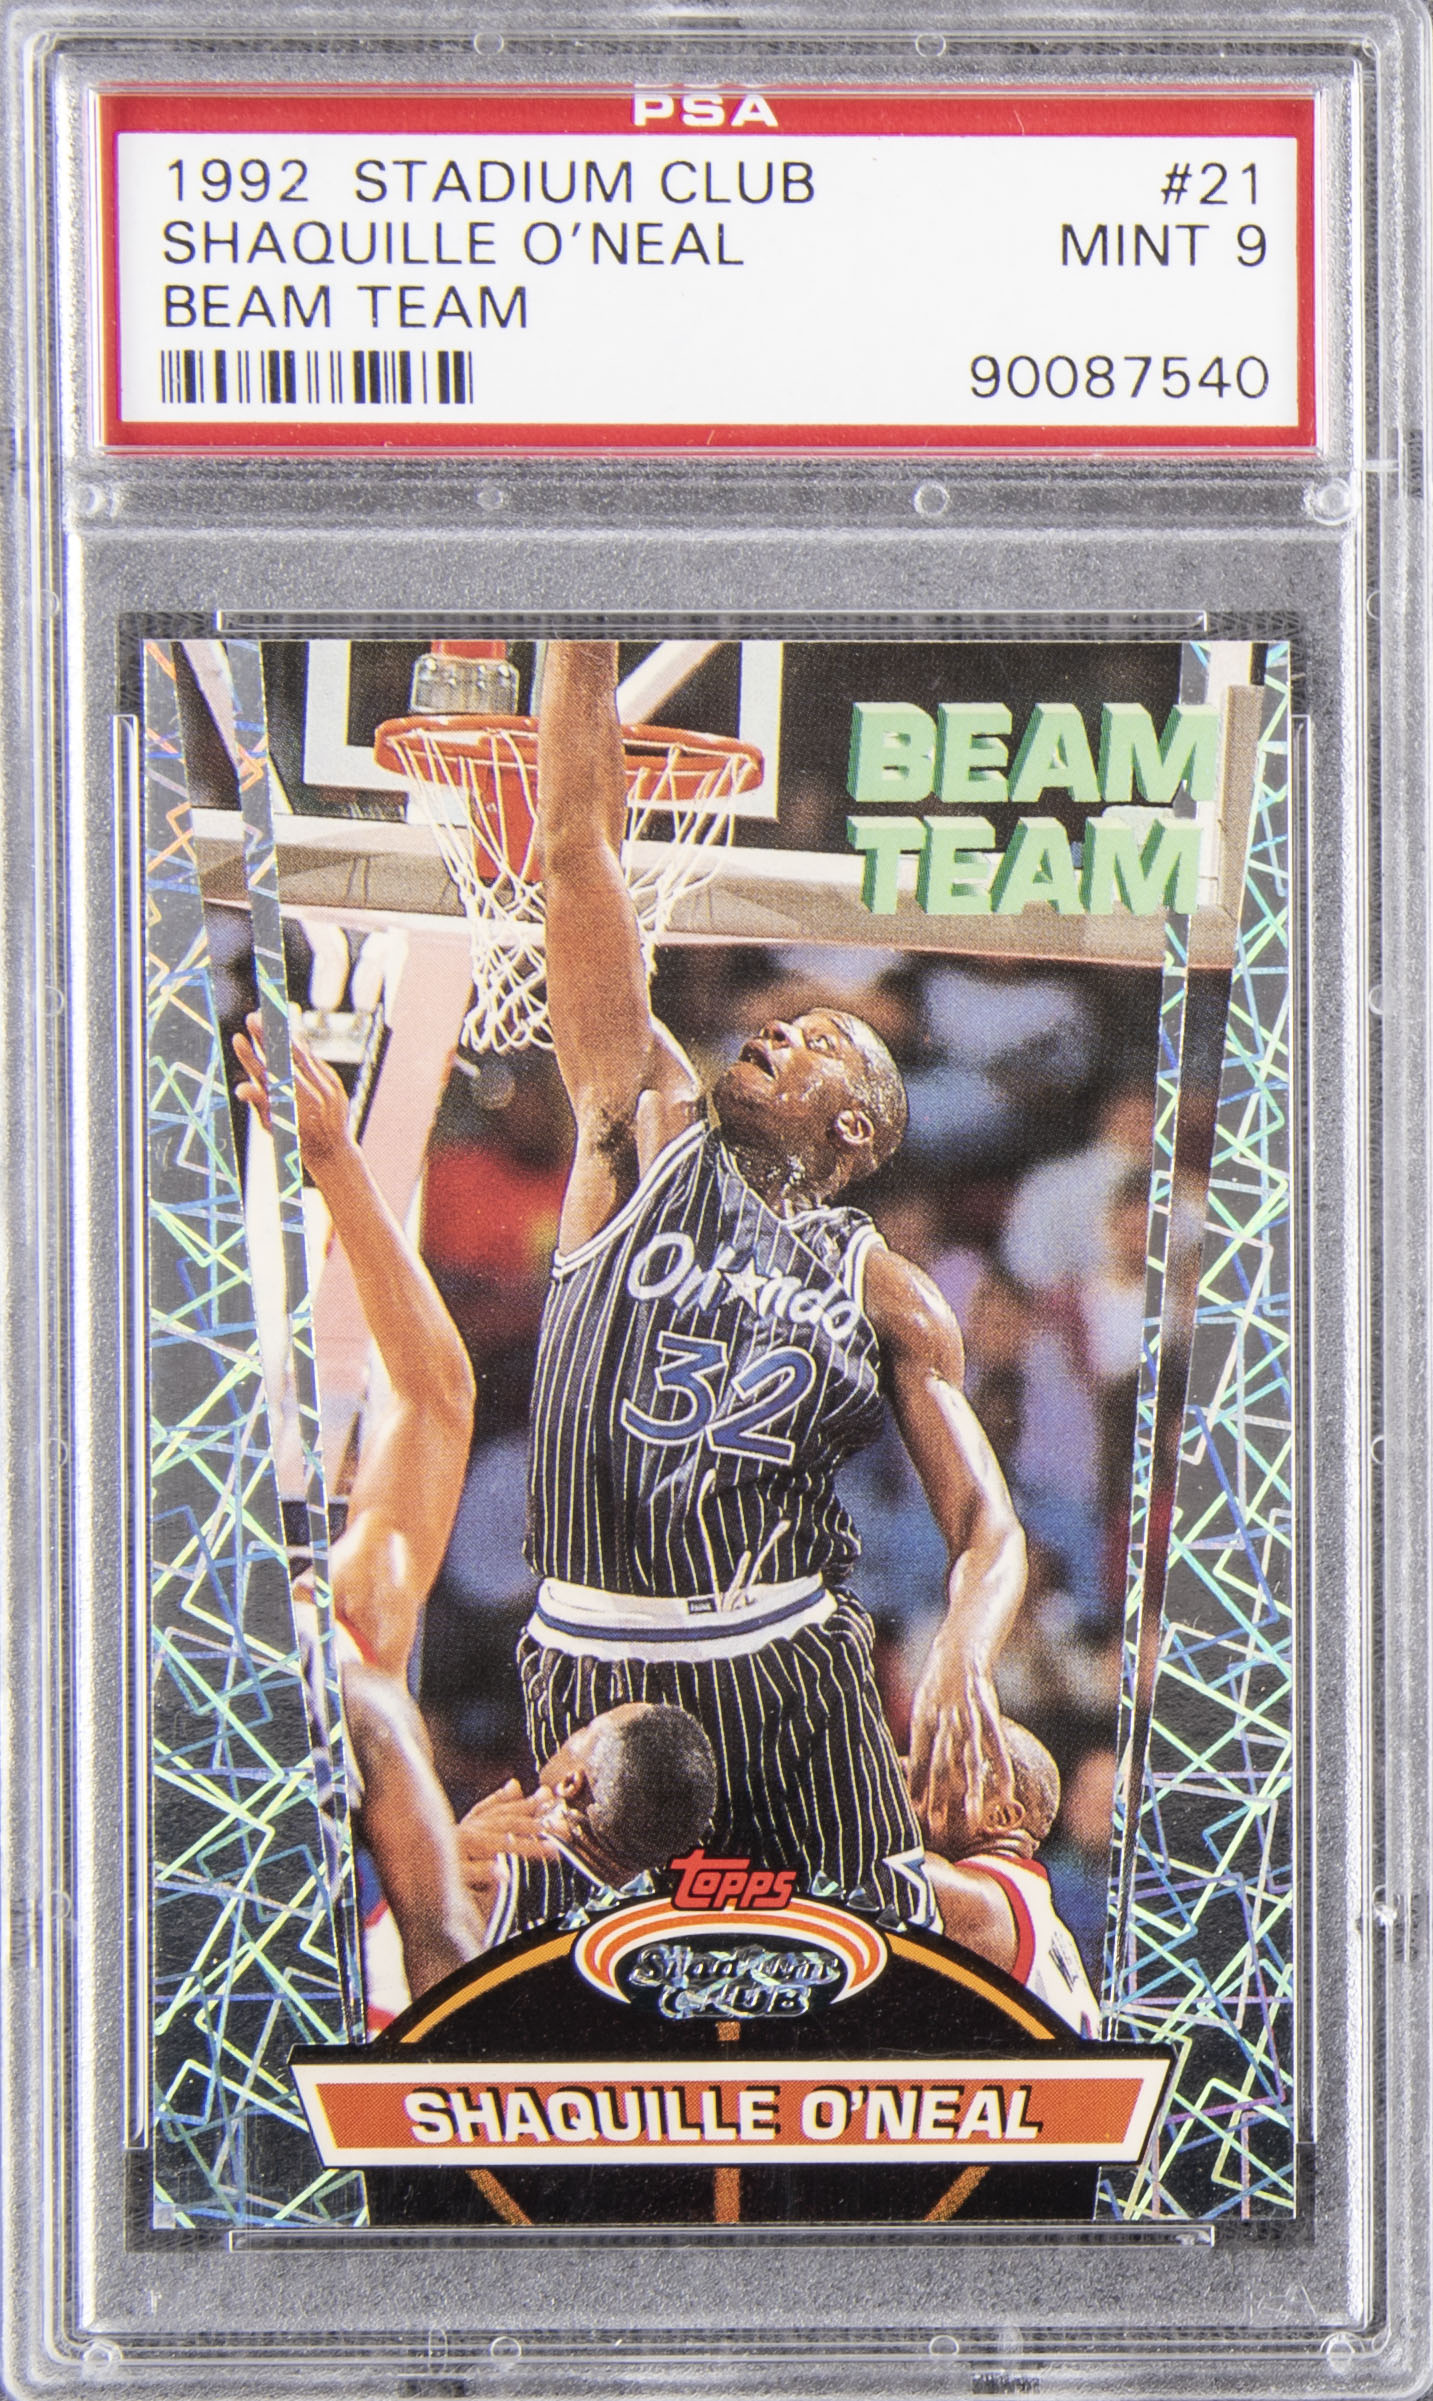 Lot Detail 199293 Topps Stadium Club Beam Team 21 Shaquille Oneal Rookie Card Psa Mint 9